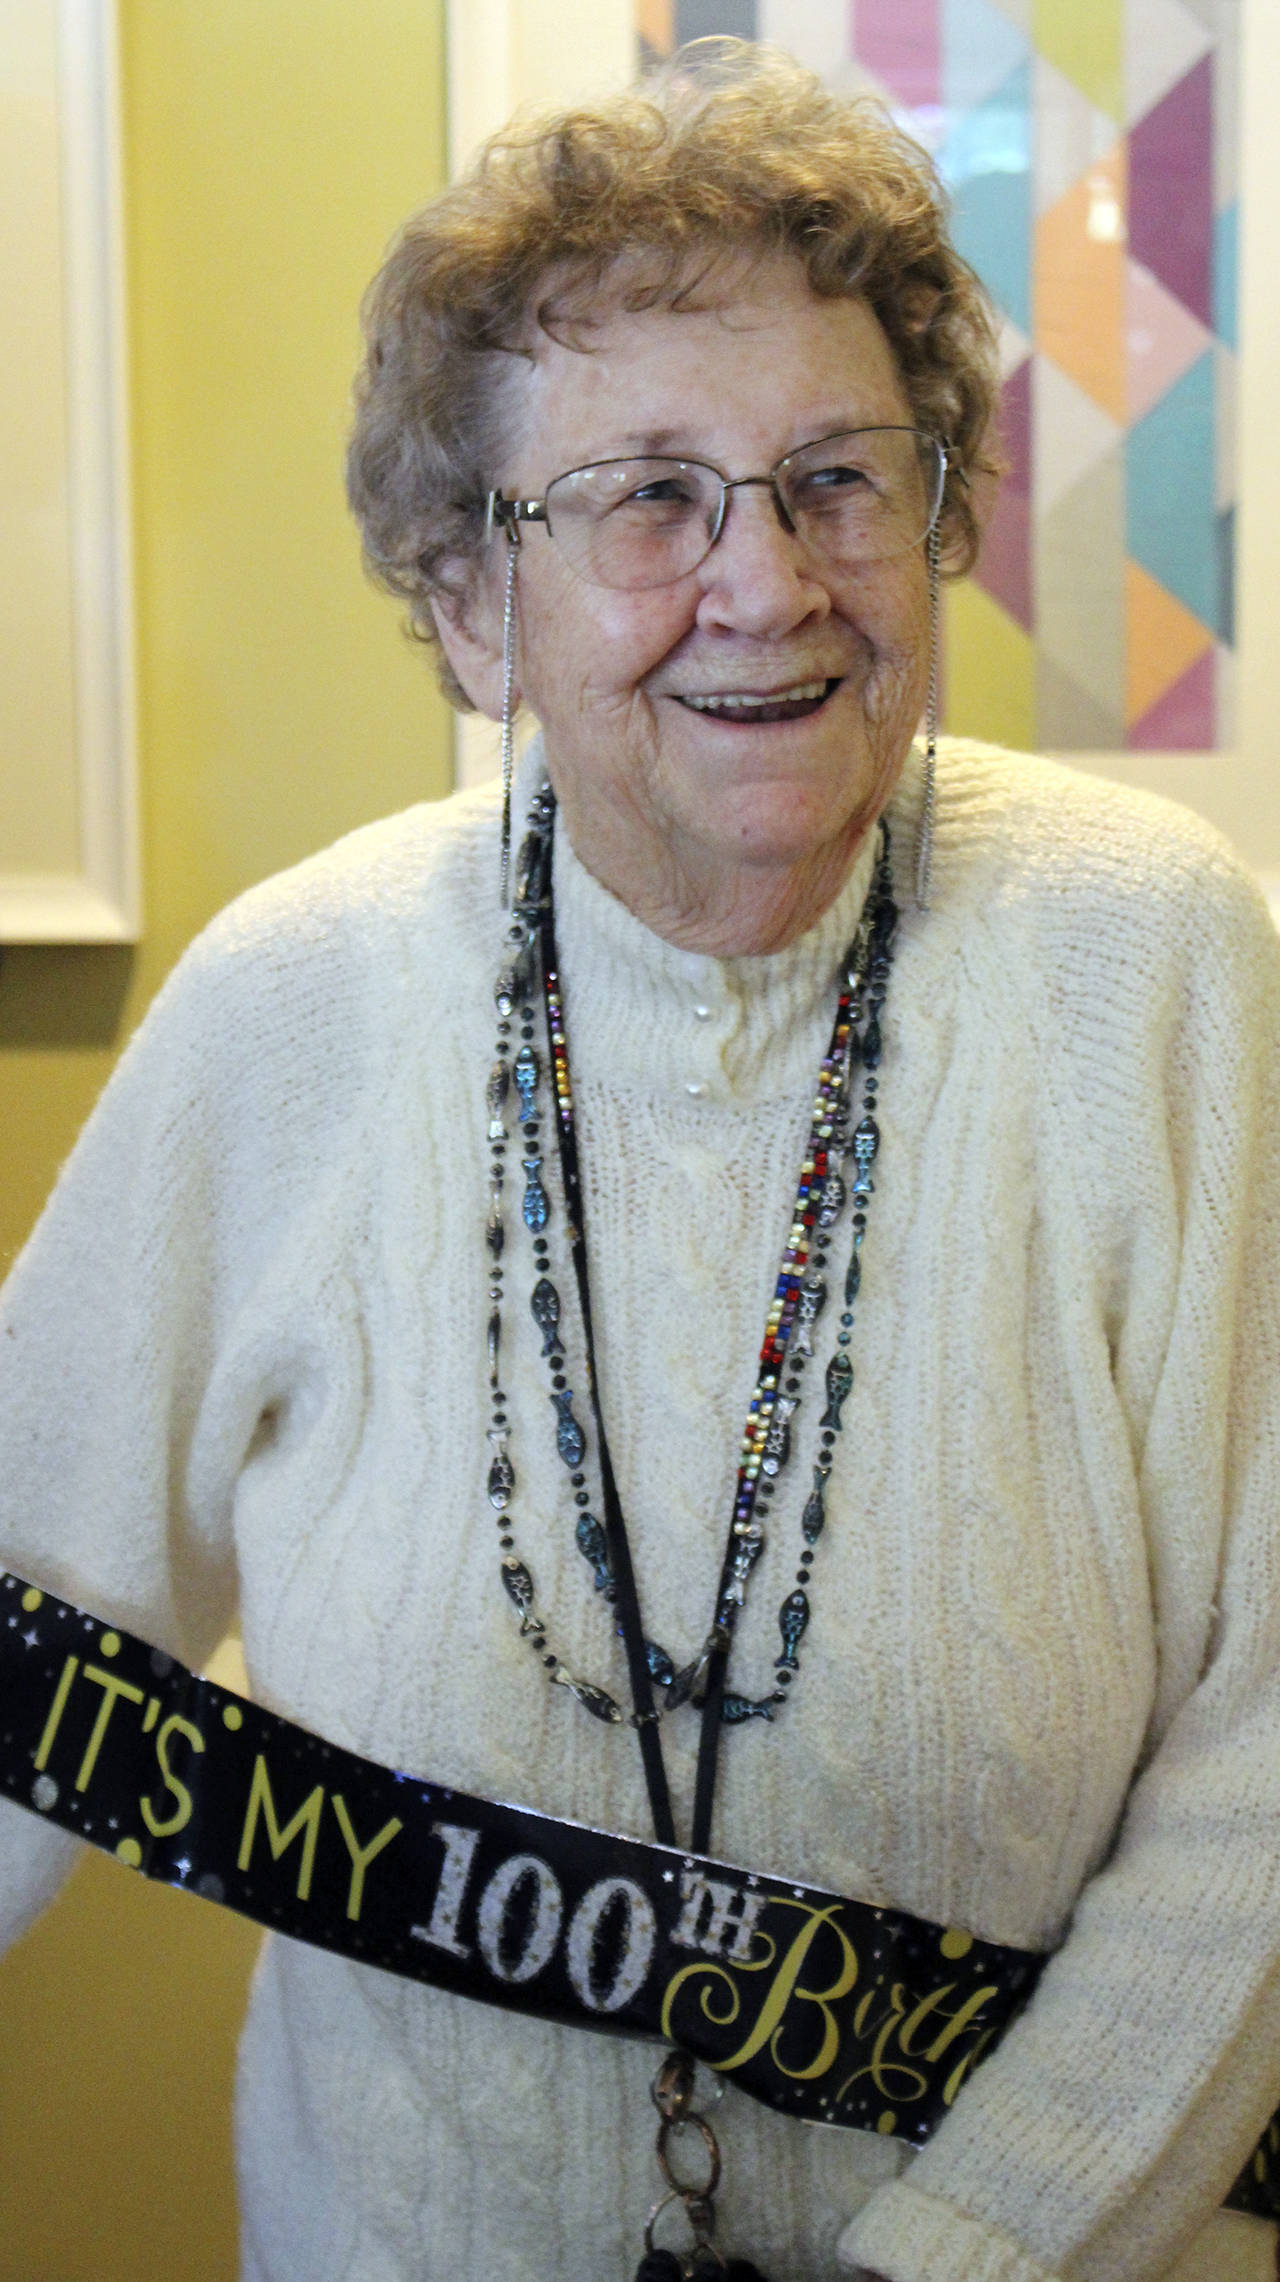 Photo by Dee Anne Shaw                                Ruth McCausland proudly sported a sash reading “It’s my 100th birthday!” during a celebration held in July 2019.